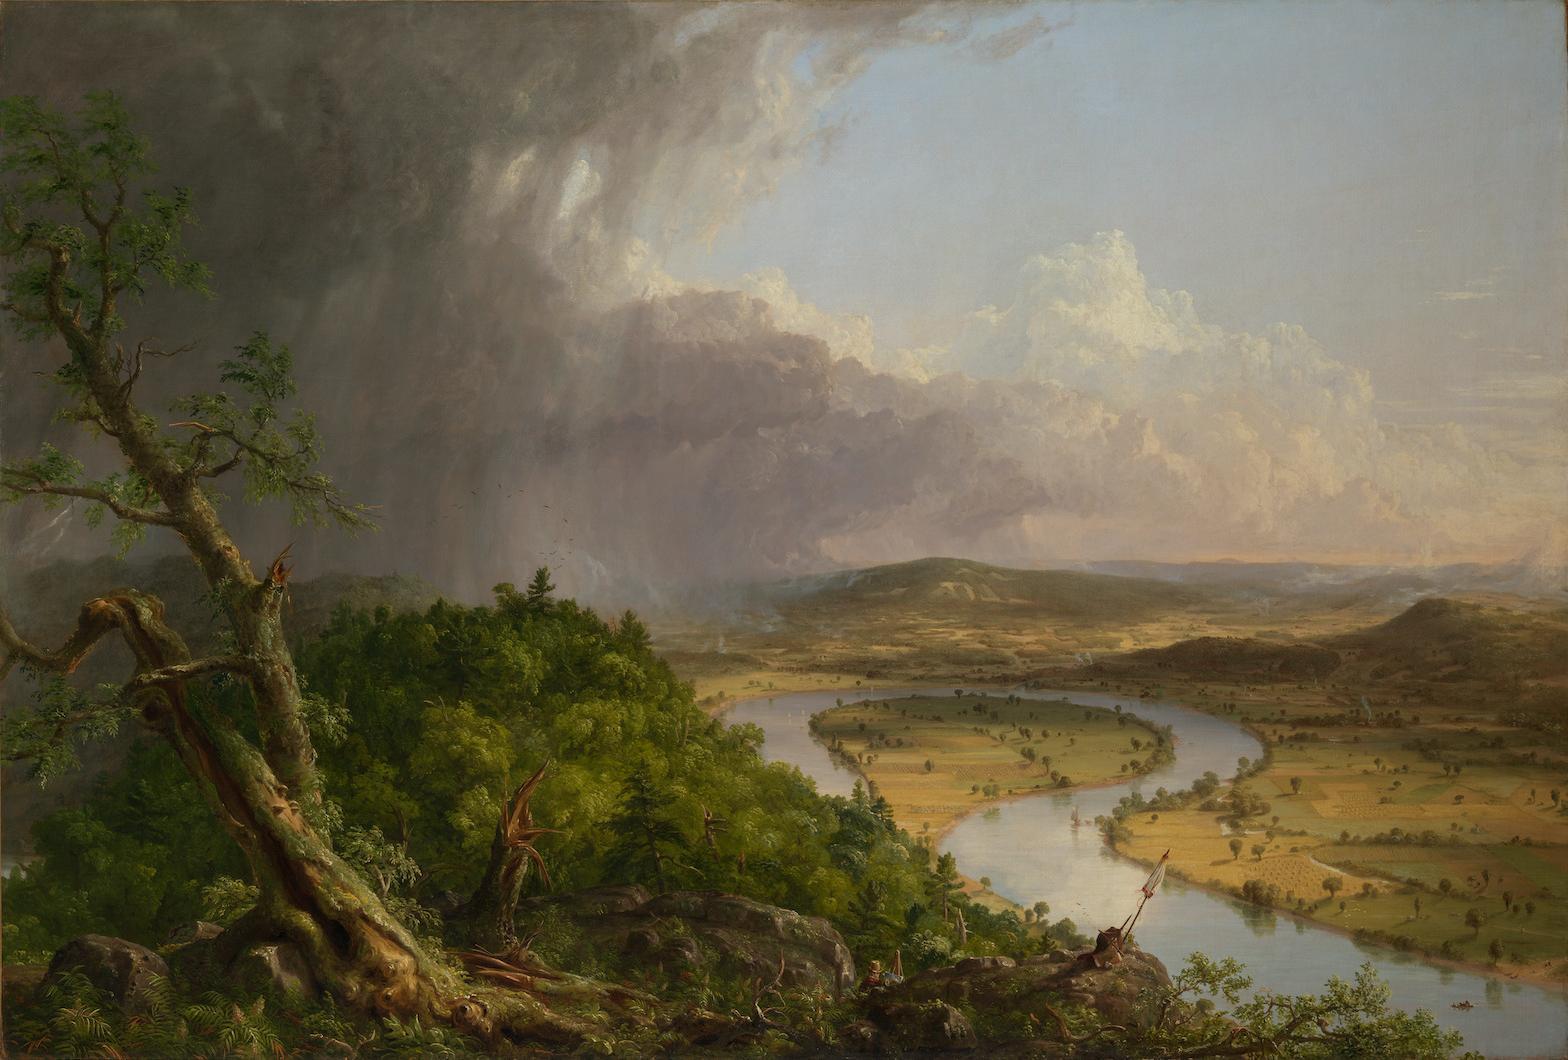 Thomas Cole,The Oxbow or View from Mount Holyoke, Northampton, Massachusetts, after a Thunderstorm, 1863. Oil on canvas. 51 1/2 x 76 in. (130.8 x 193 cm).